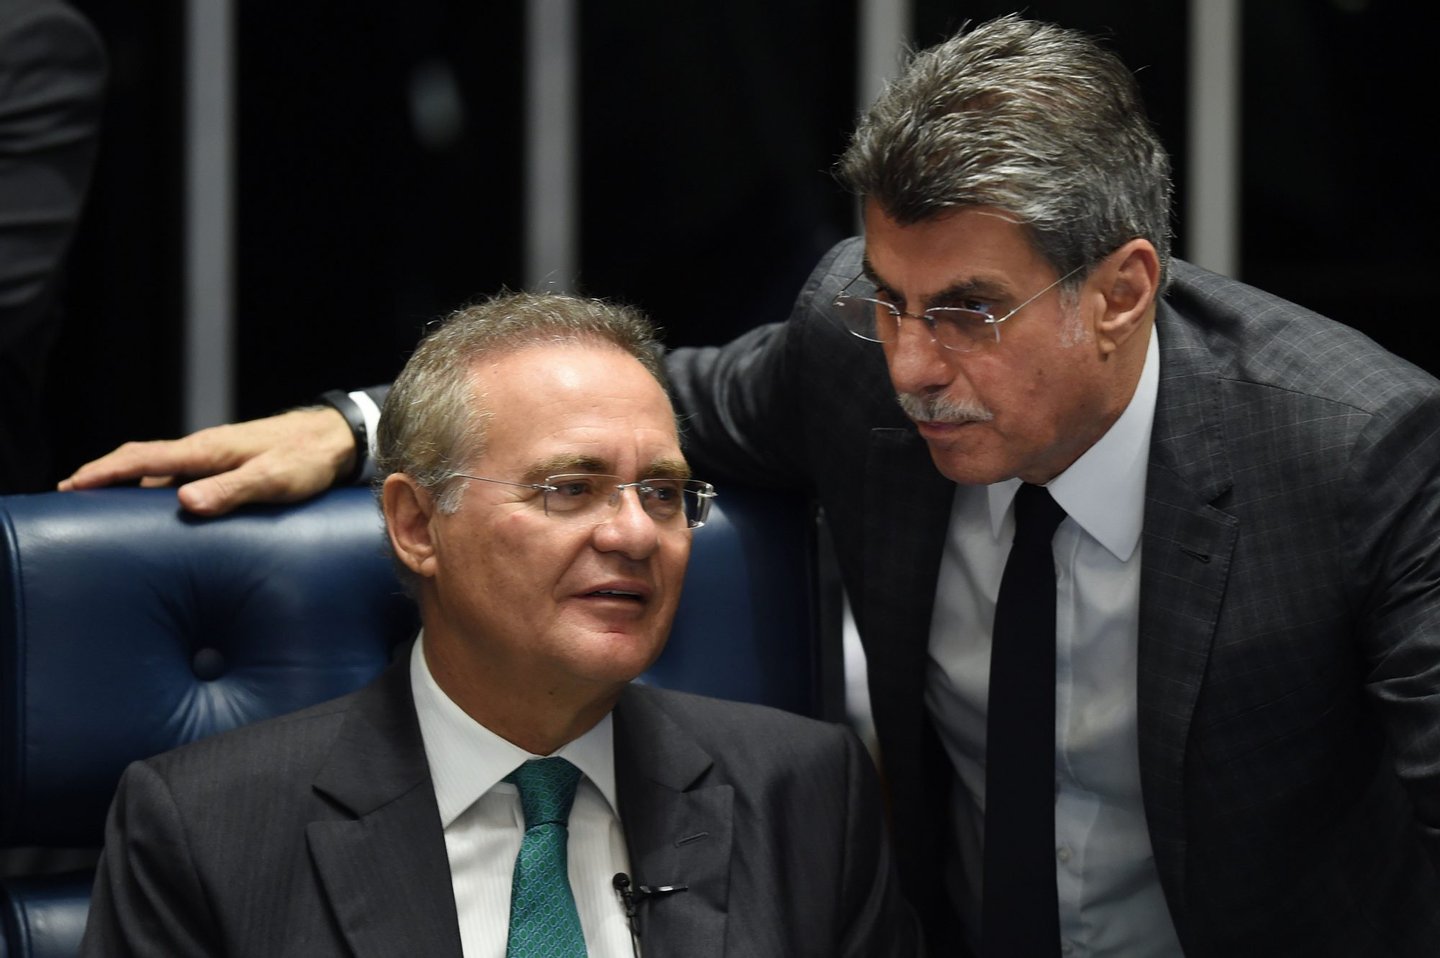 Senate President Renan Calheiros(L) and senator Romero Juca talk during debate Wednesday on suspending and impeaching President Dilma Rousseff in Brasilia on May 11, 2016. The Senate opened debate that could bring down the curtain on 13 years of leftist rule in Latin America's biggest country. Even allies of Rousseff, 68, said she had no chance of surviving the vote. / AFP / EVARISTO SA (Photo credit should read EVARISTO SA/AFP/Getty Images)